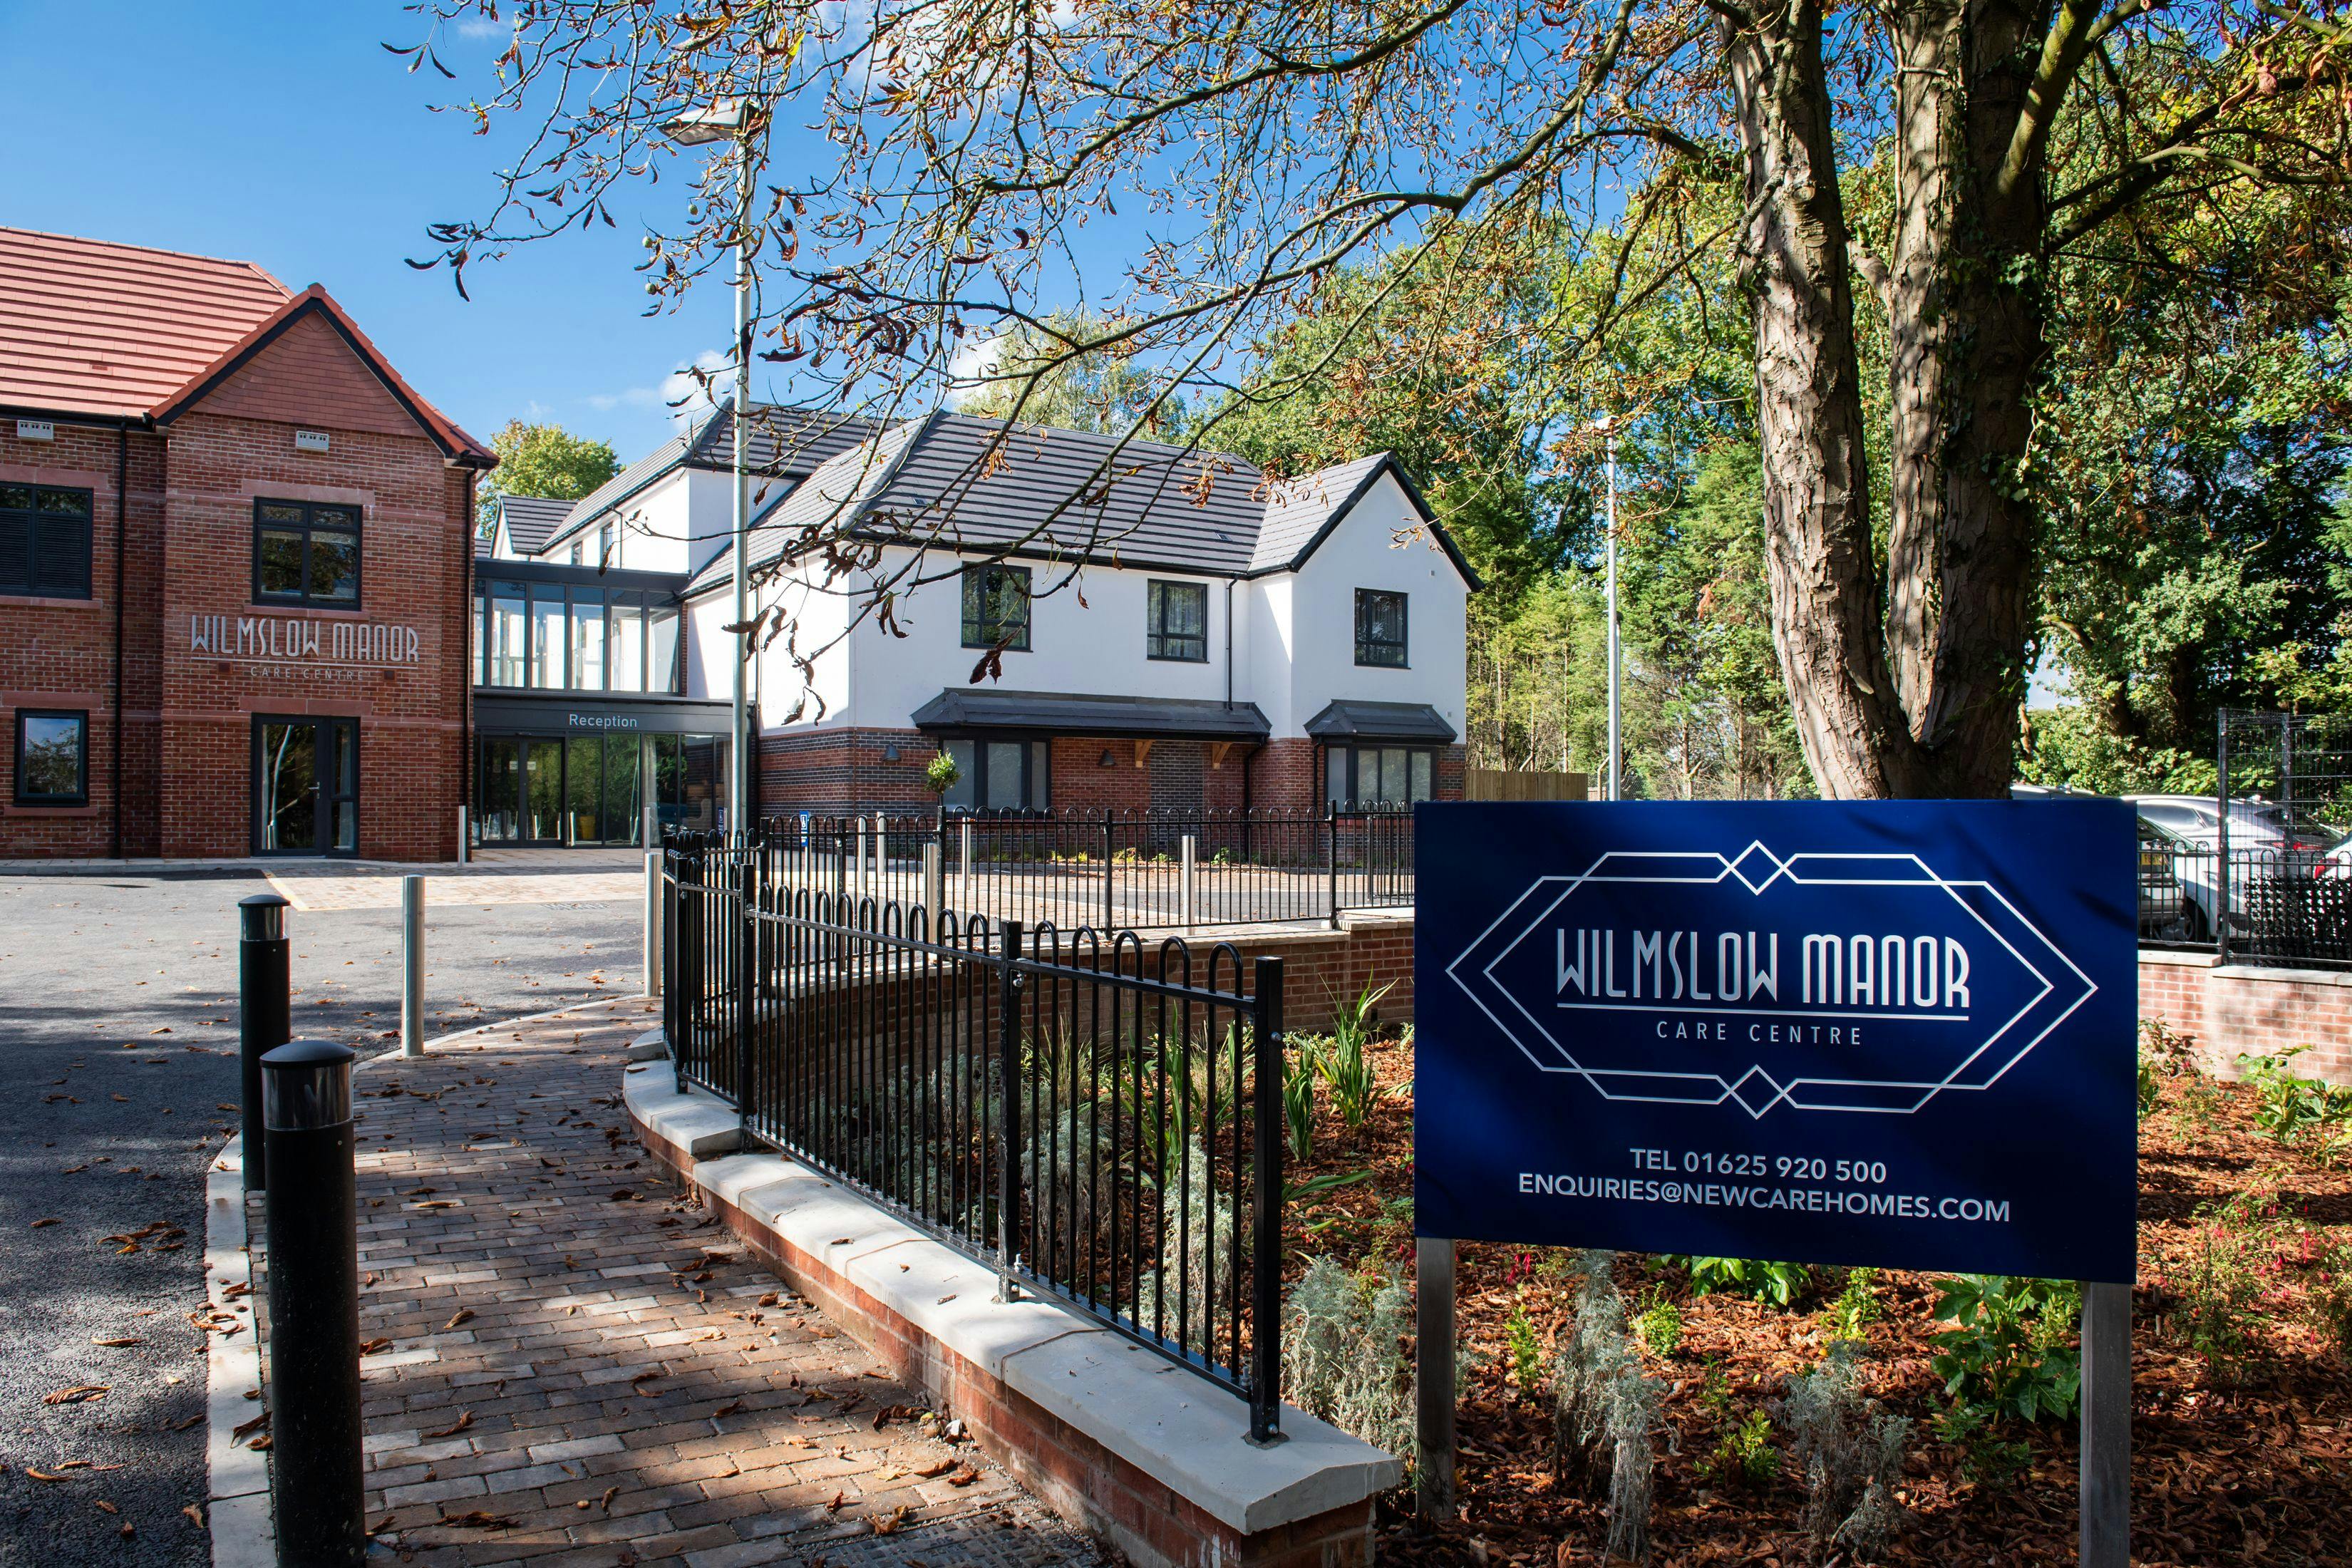 New Care - Wilmslow Manor care home 3